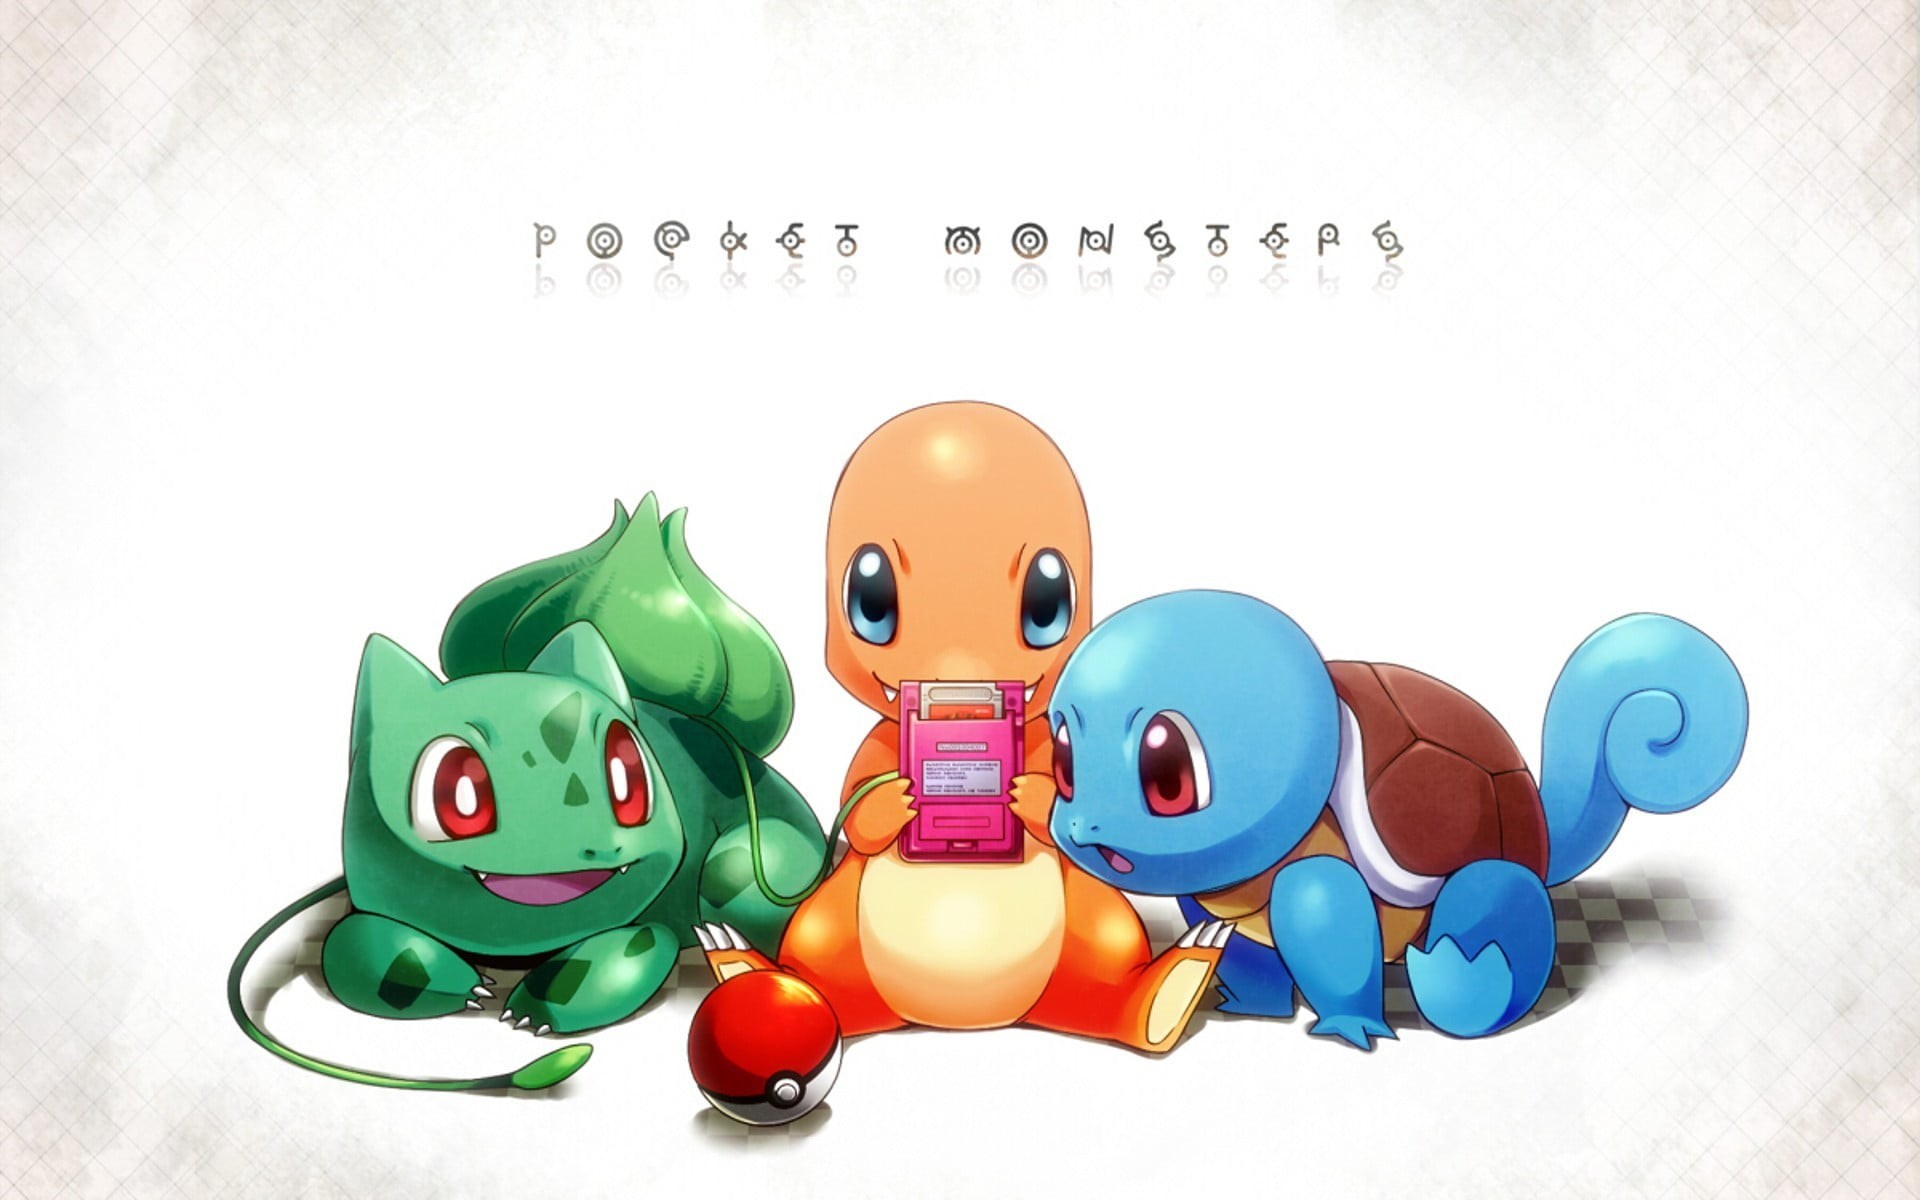 Wallpaper id text large group of objects human representation pokemon no people green color indoors p monsters plastic representation male likeness free download